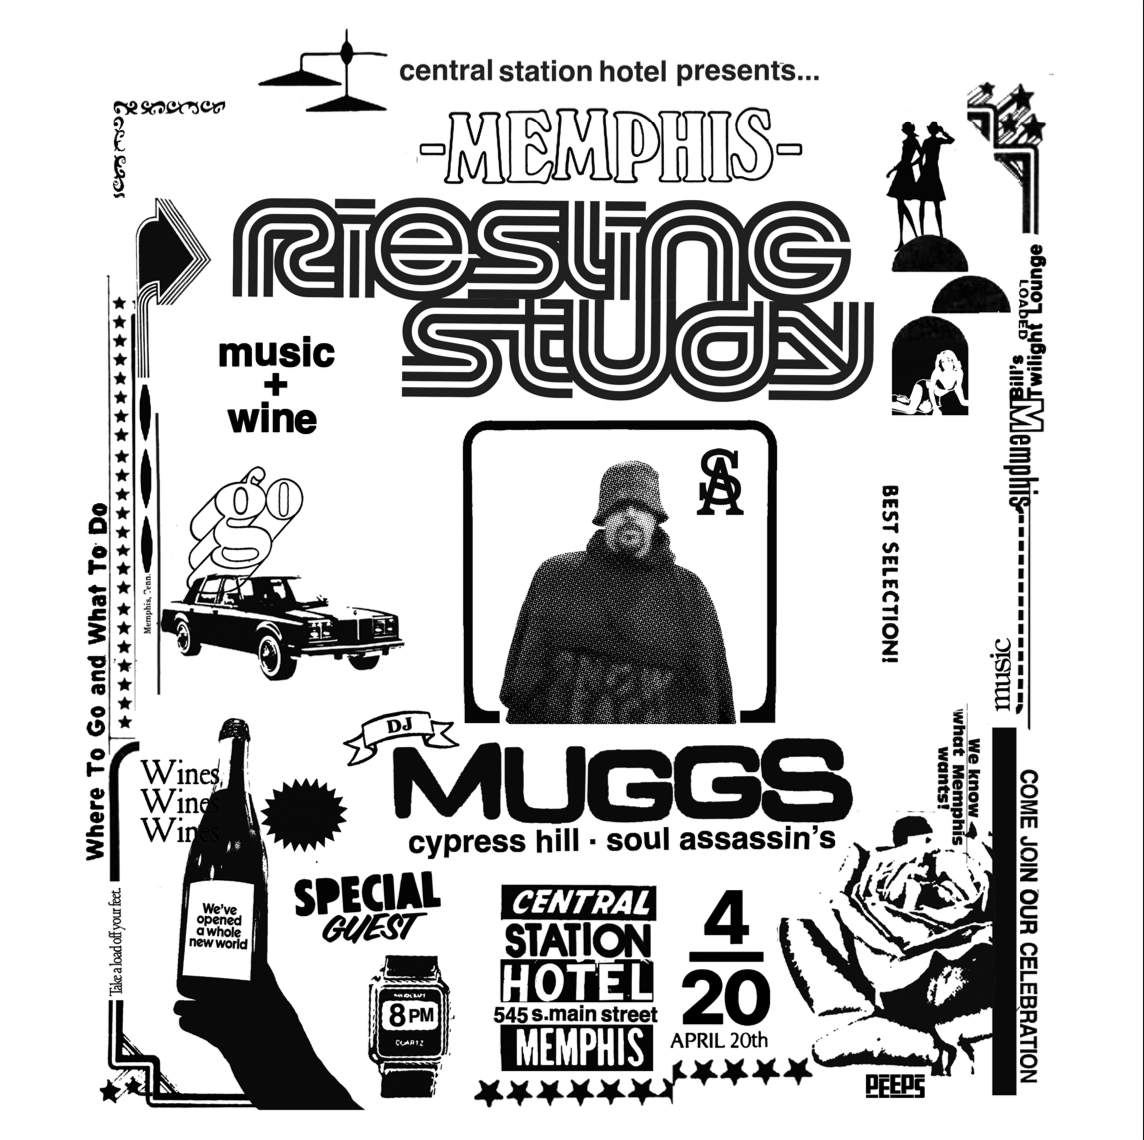 Riesling Study with DJ Muggs (Producer/DJ for Cypress Hill) - フライヤー表